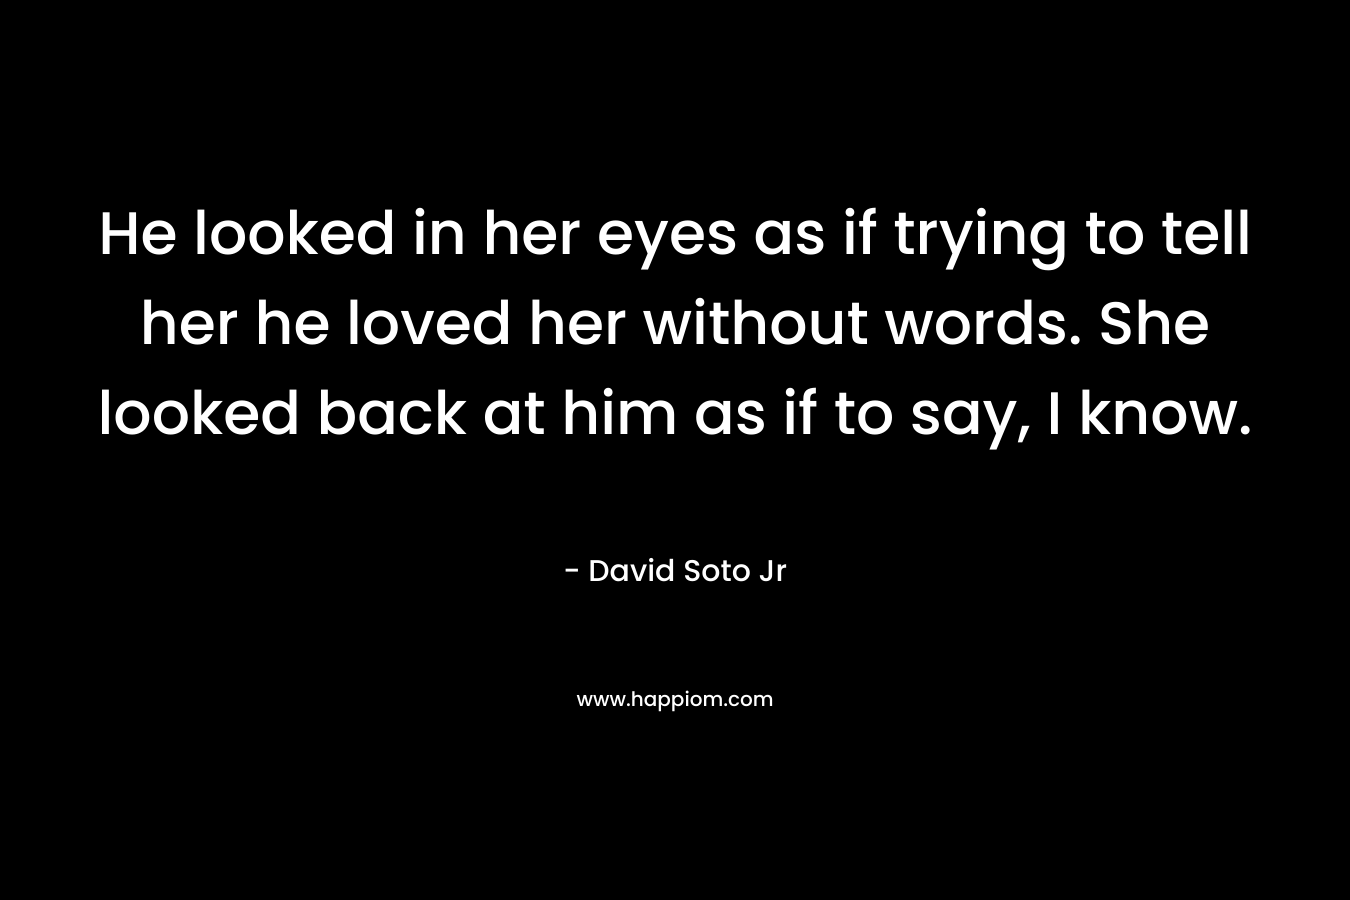 He looked in her eyes as if trying to tell her he loved her without words. She looked back at him as if to say, I know.